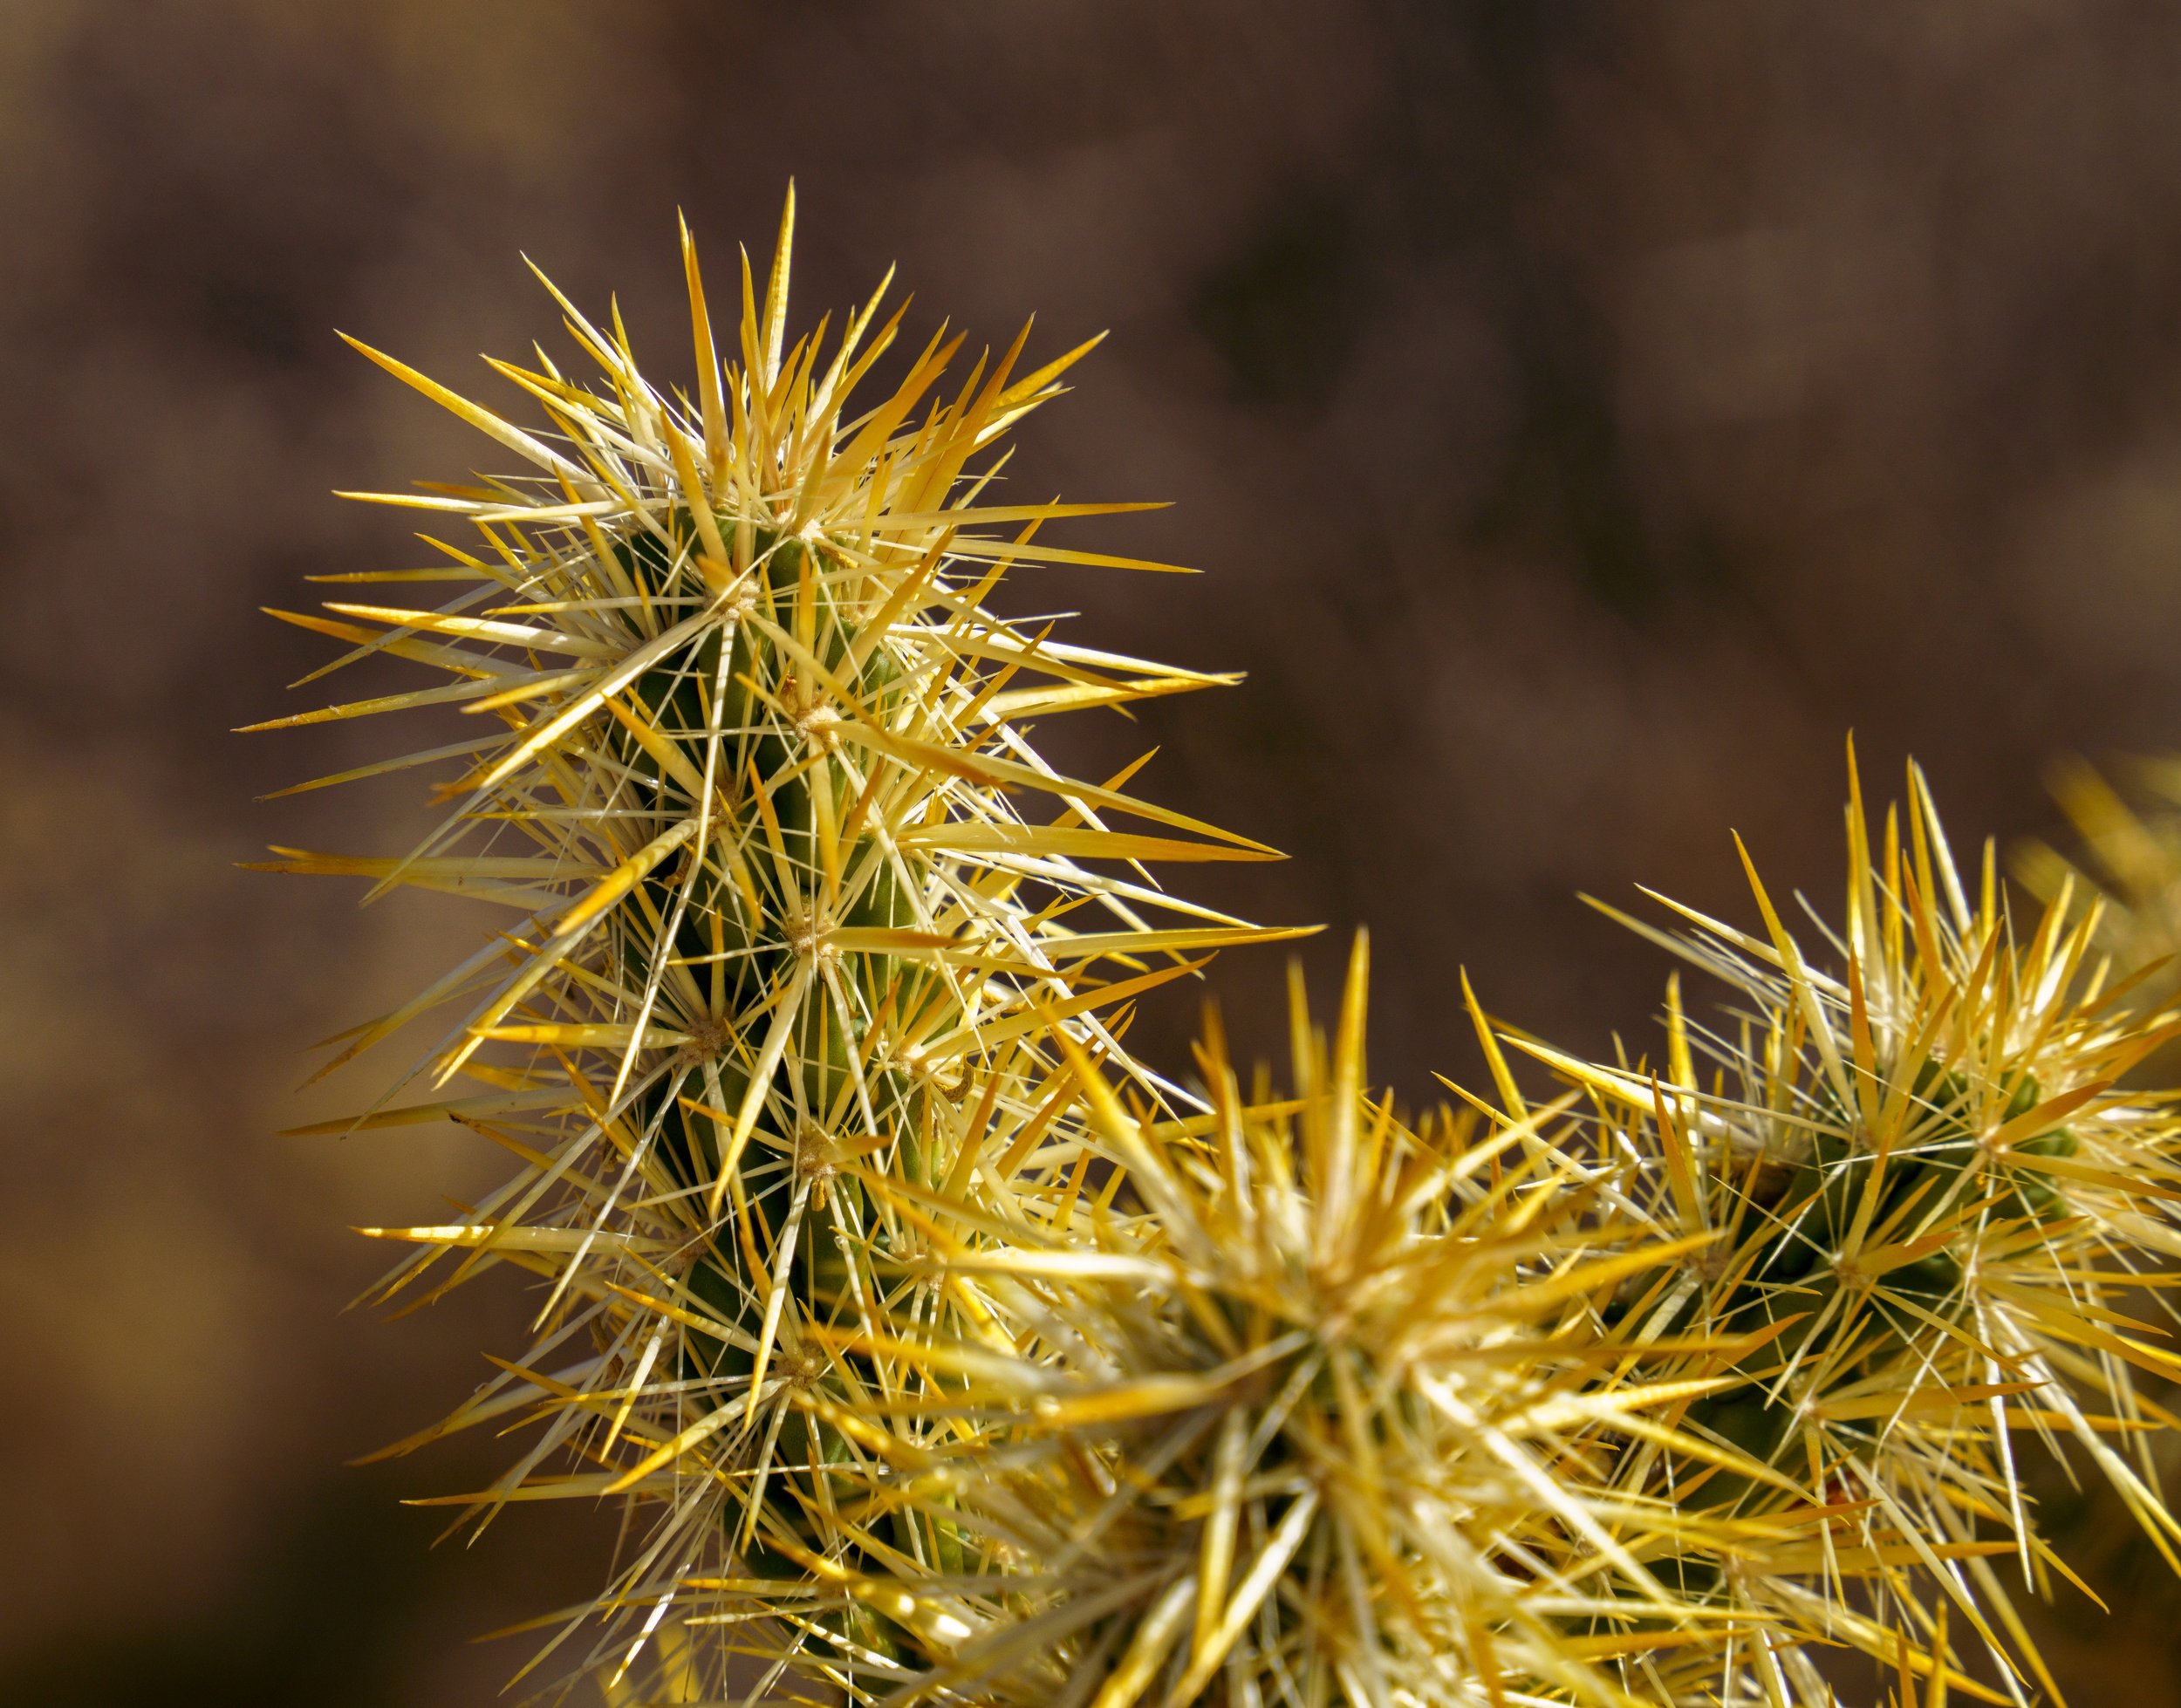  A cactus in Joshua Tree National Park 